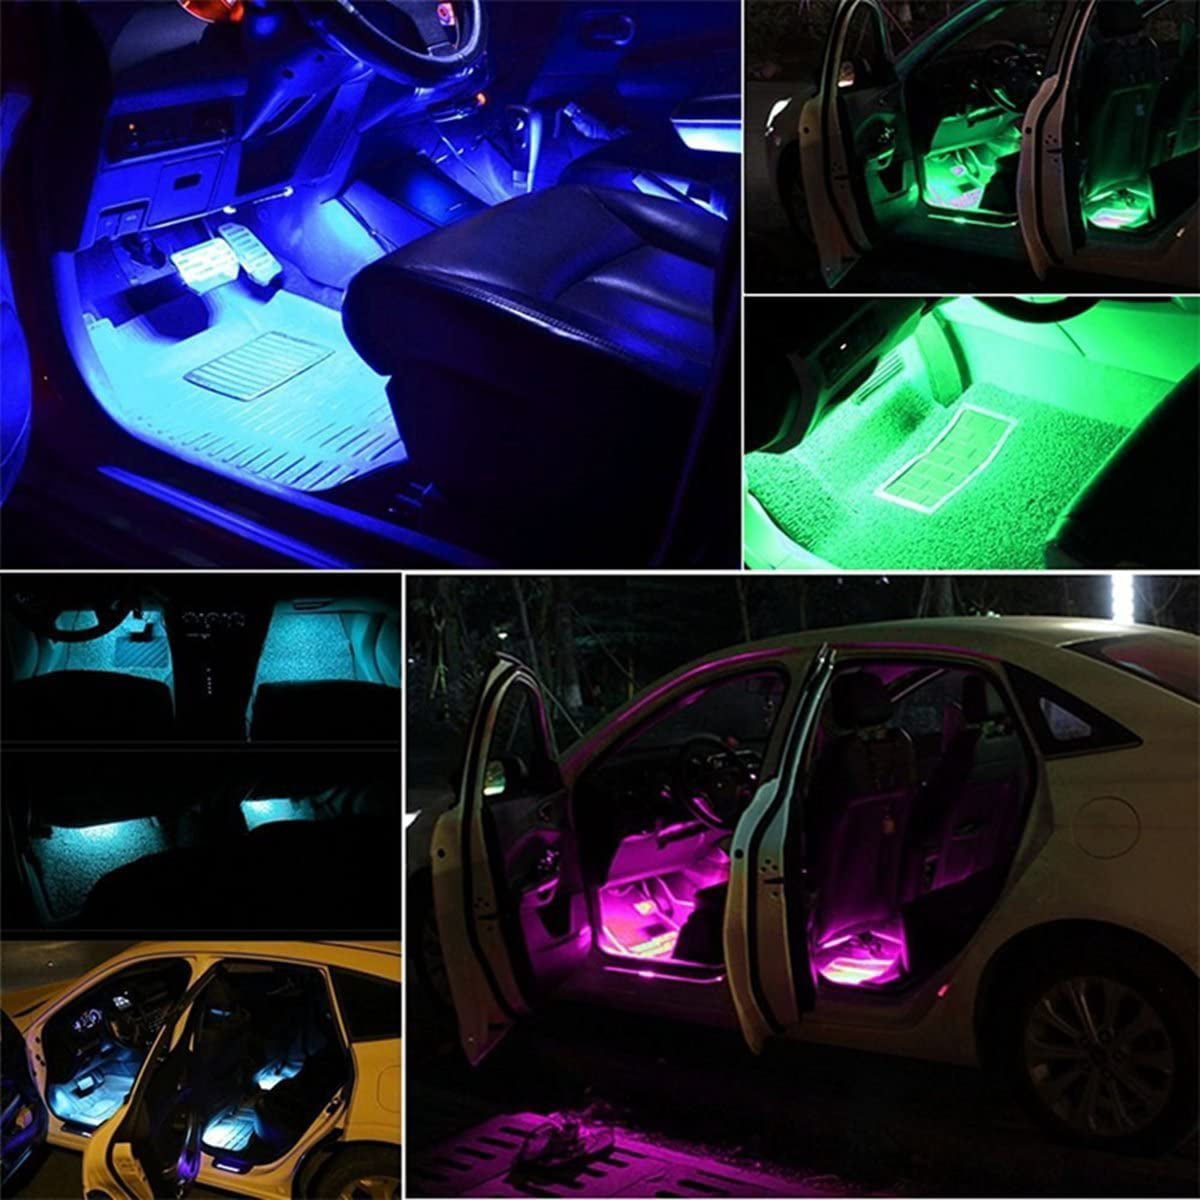 Car Charger Included 4pcs 36 LED 5050 Multi-Color Car Interior Lights Under Dash Lighting Waterproof Kit with Multi-Mode Change and Wireless Remote Control DC 12V XUNATA Car LED Strip Light 